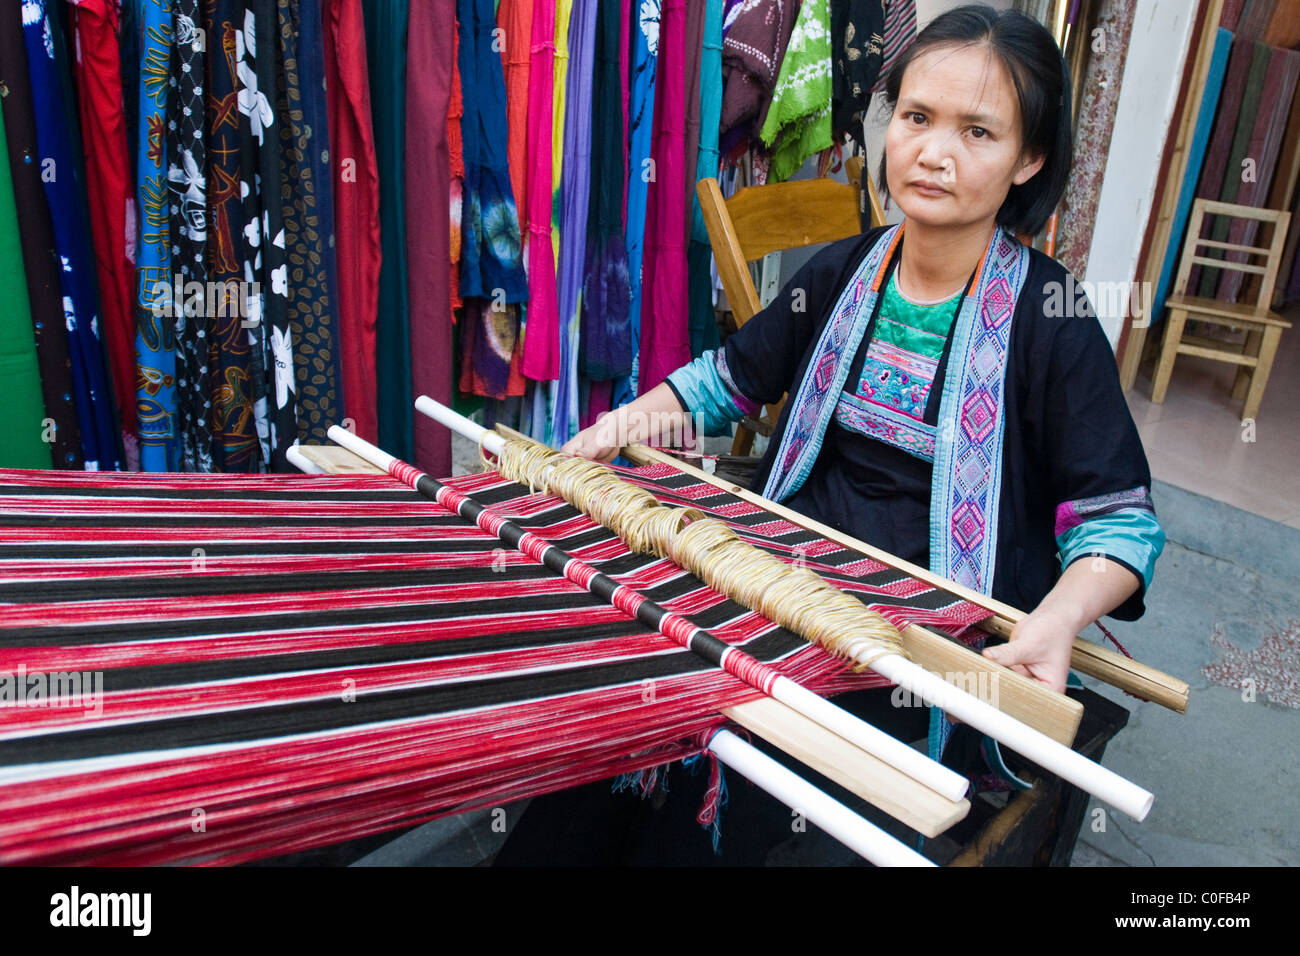 Guanxi  minority woman making a traditional textile on a wooden loom. Stock Photo